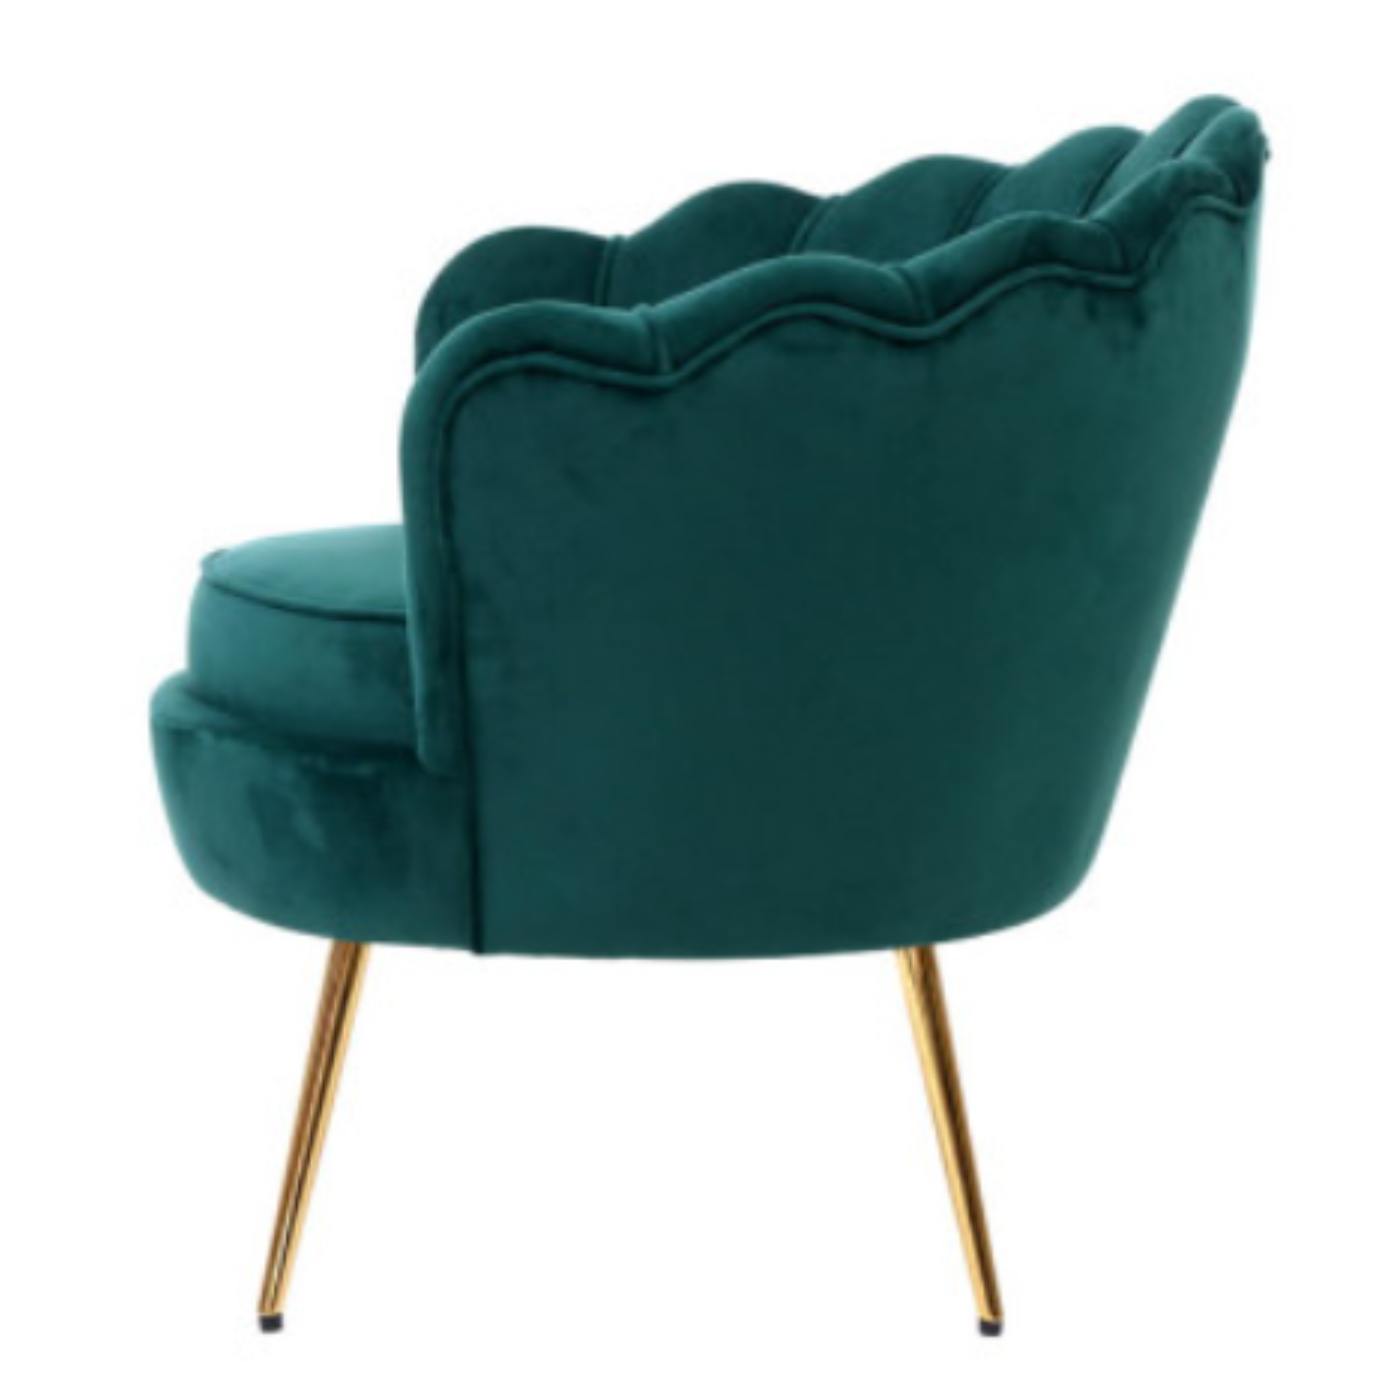 Scallop Armchair in Emerald Green